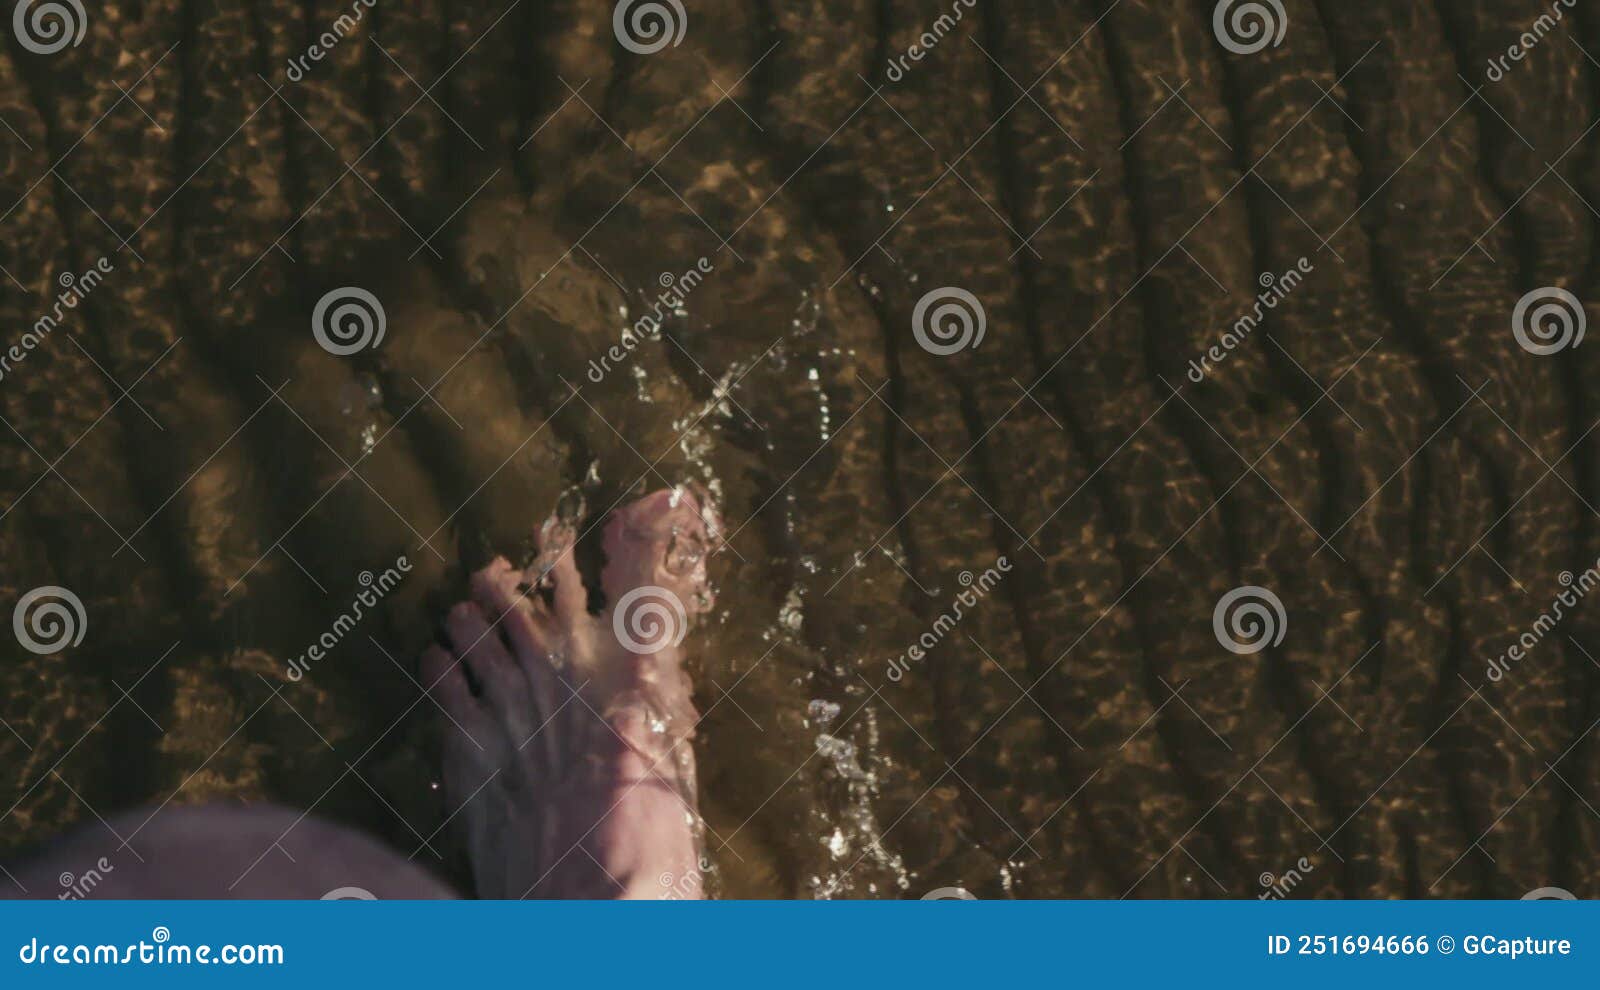 Slow Motion Pov View Man Walking Barefoot In Shallow Water On Beach Stock Footage Video Of